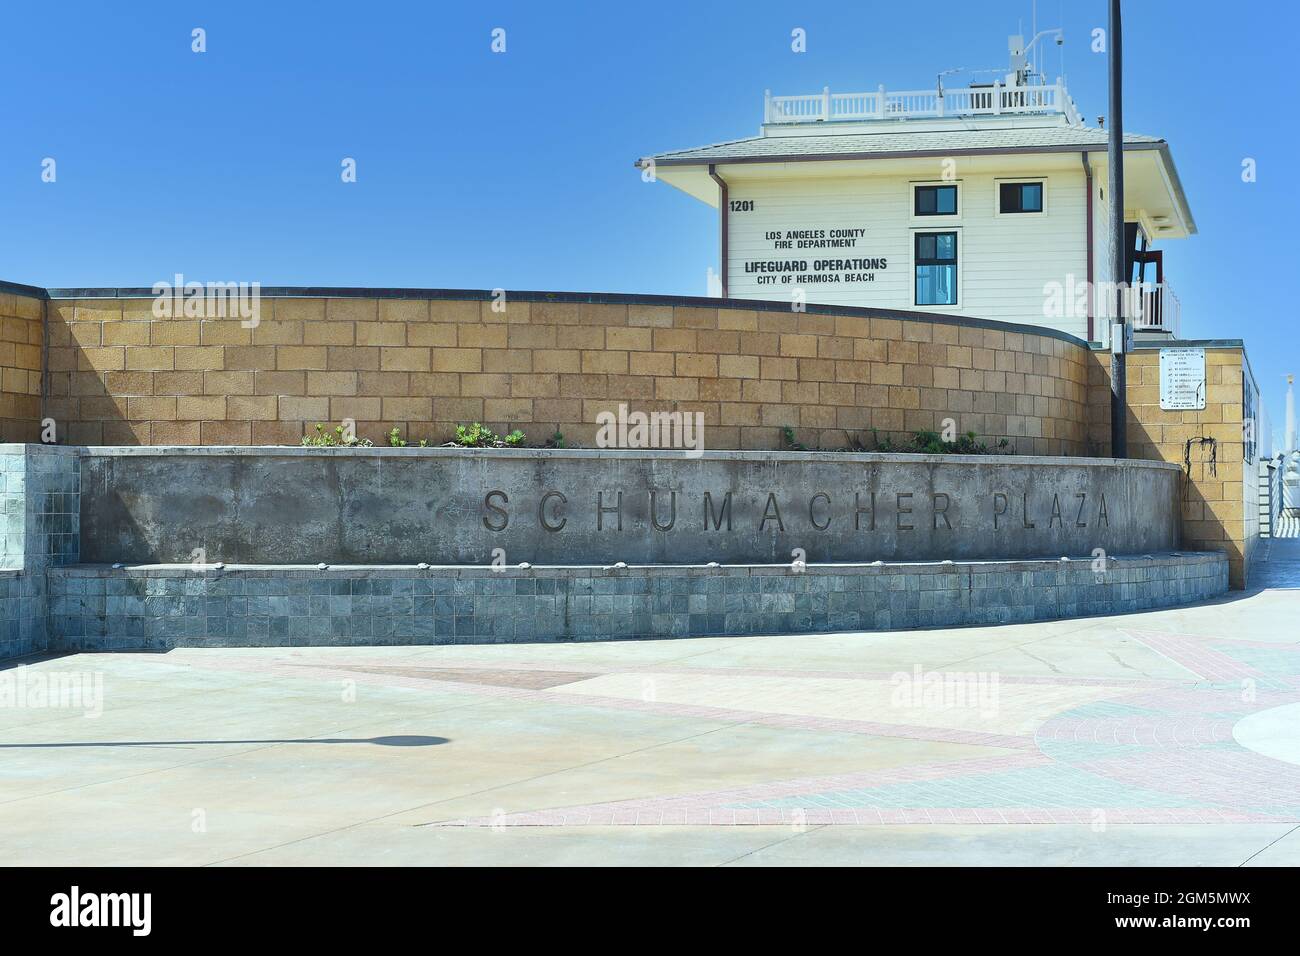 HERMOSA BEACH , CALIFORNIA - 15 SEPT 2021: Schumacher Plaza and the Lifeguard Operations Building at the Hermosa Beach Pier. Stock Photo